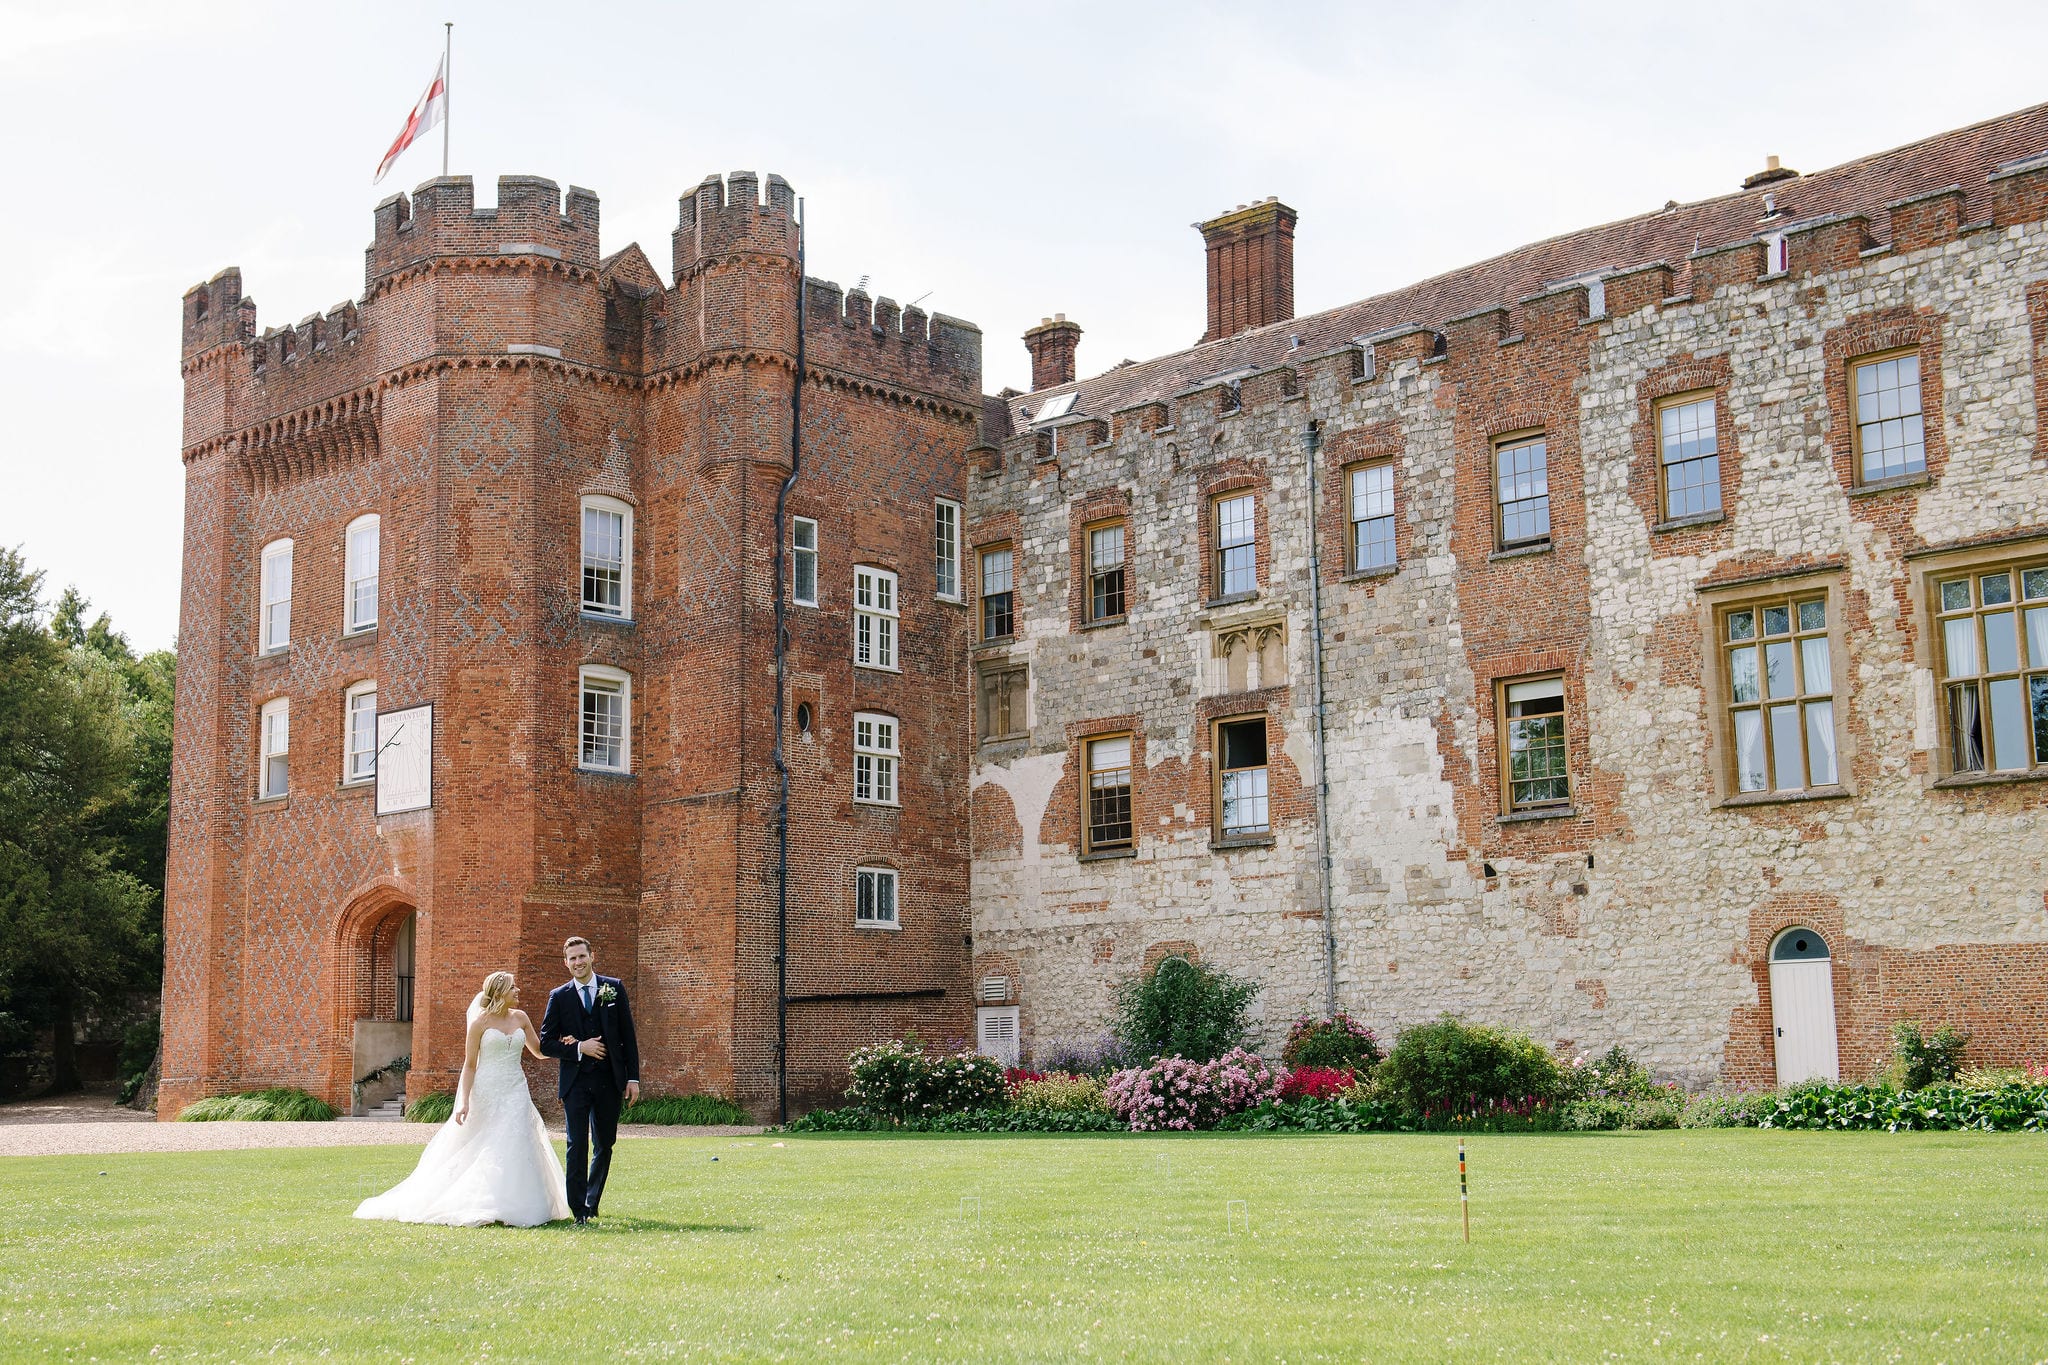 Photography in the grounds at Farnham Castle in Surrey